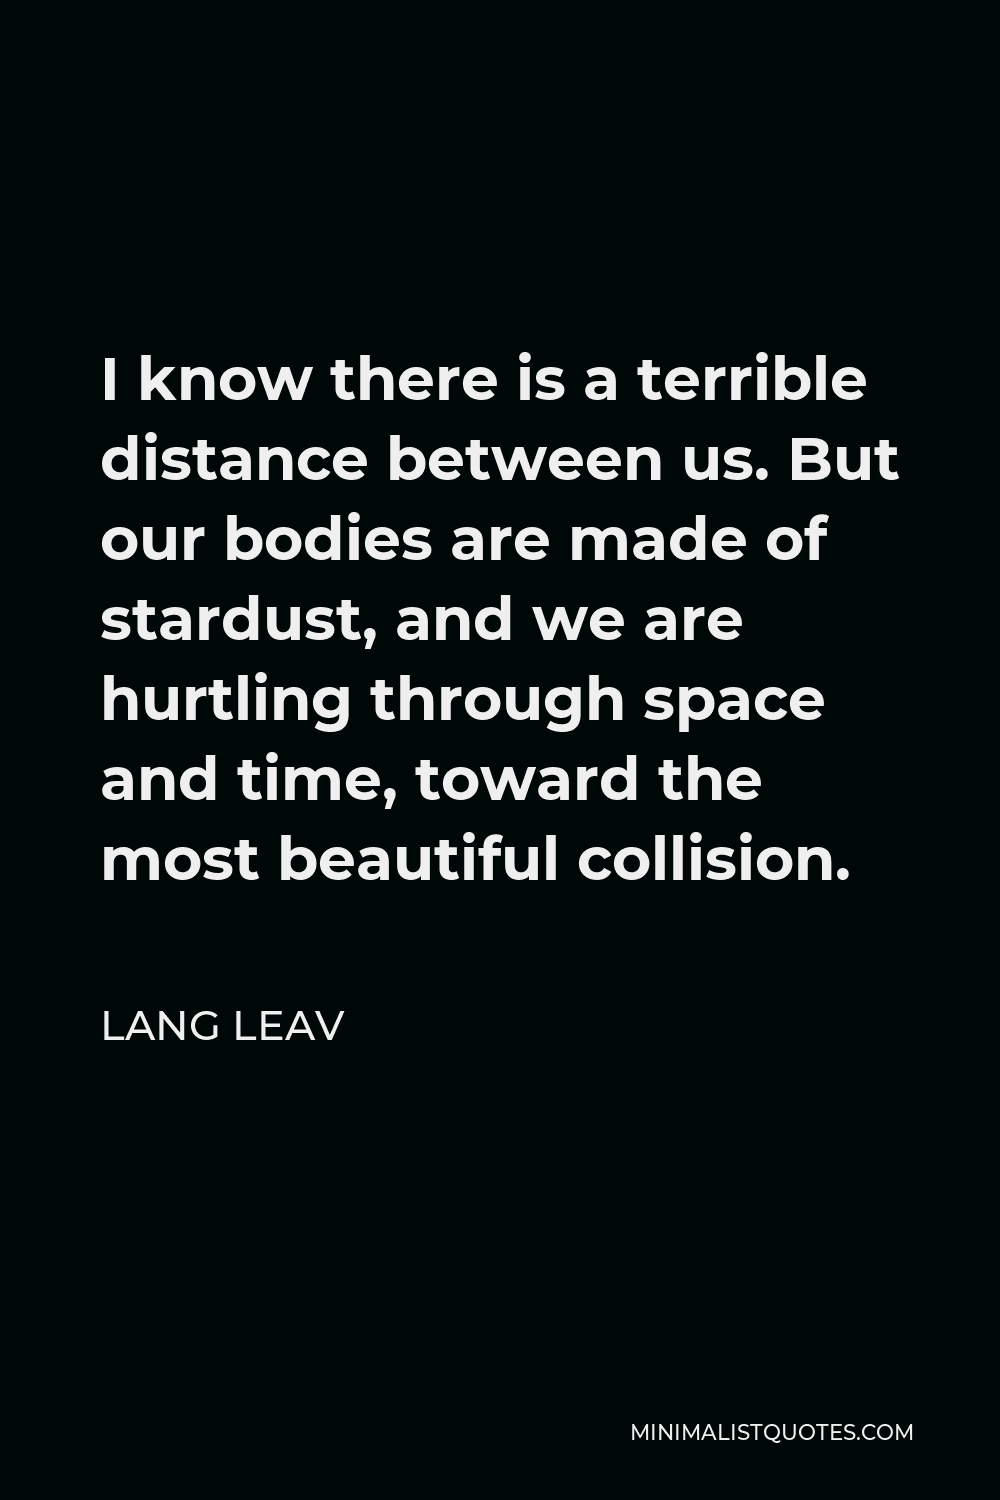 Lang Leav Quote - I know there is a terrible distance between us. But our bodies are made of stardust, and we are hurtling through space and time, toward the most beautiful collision.